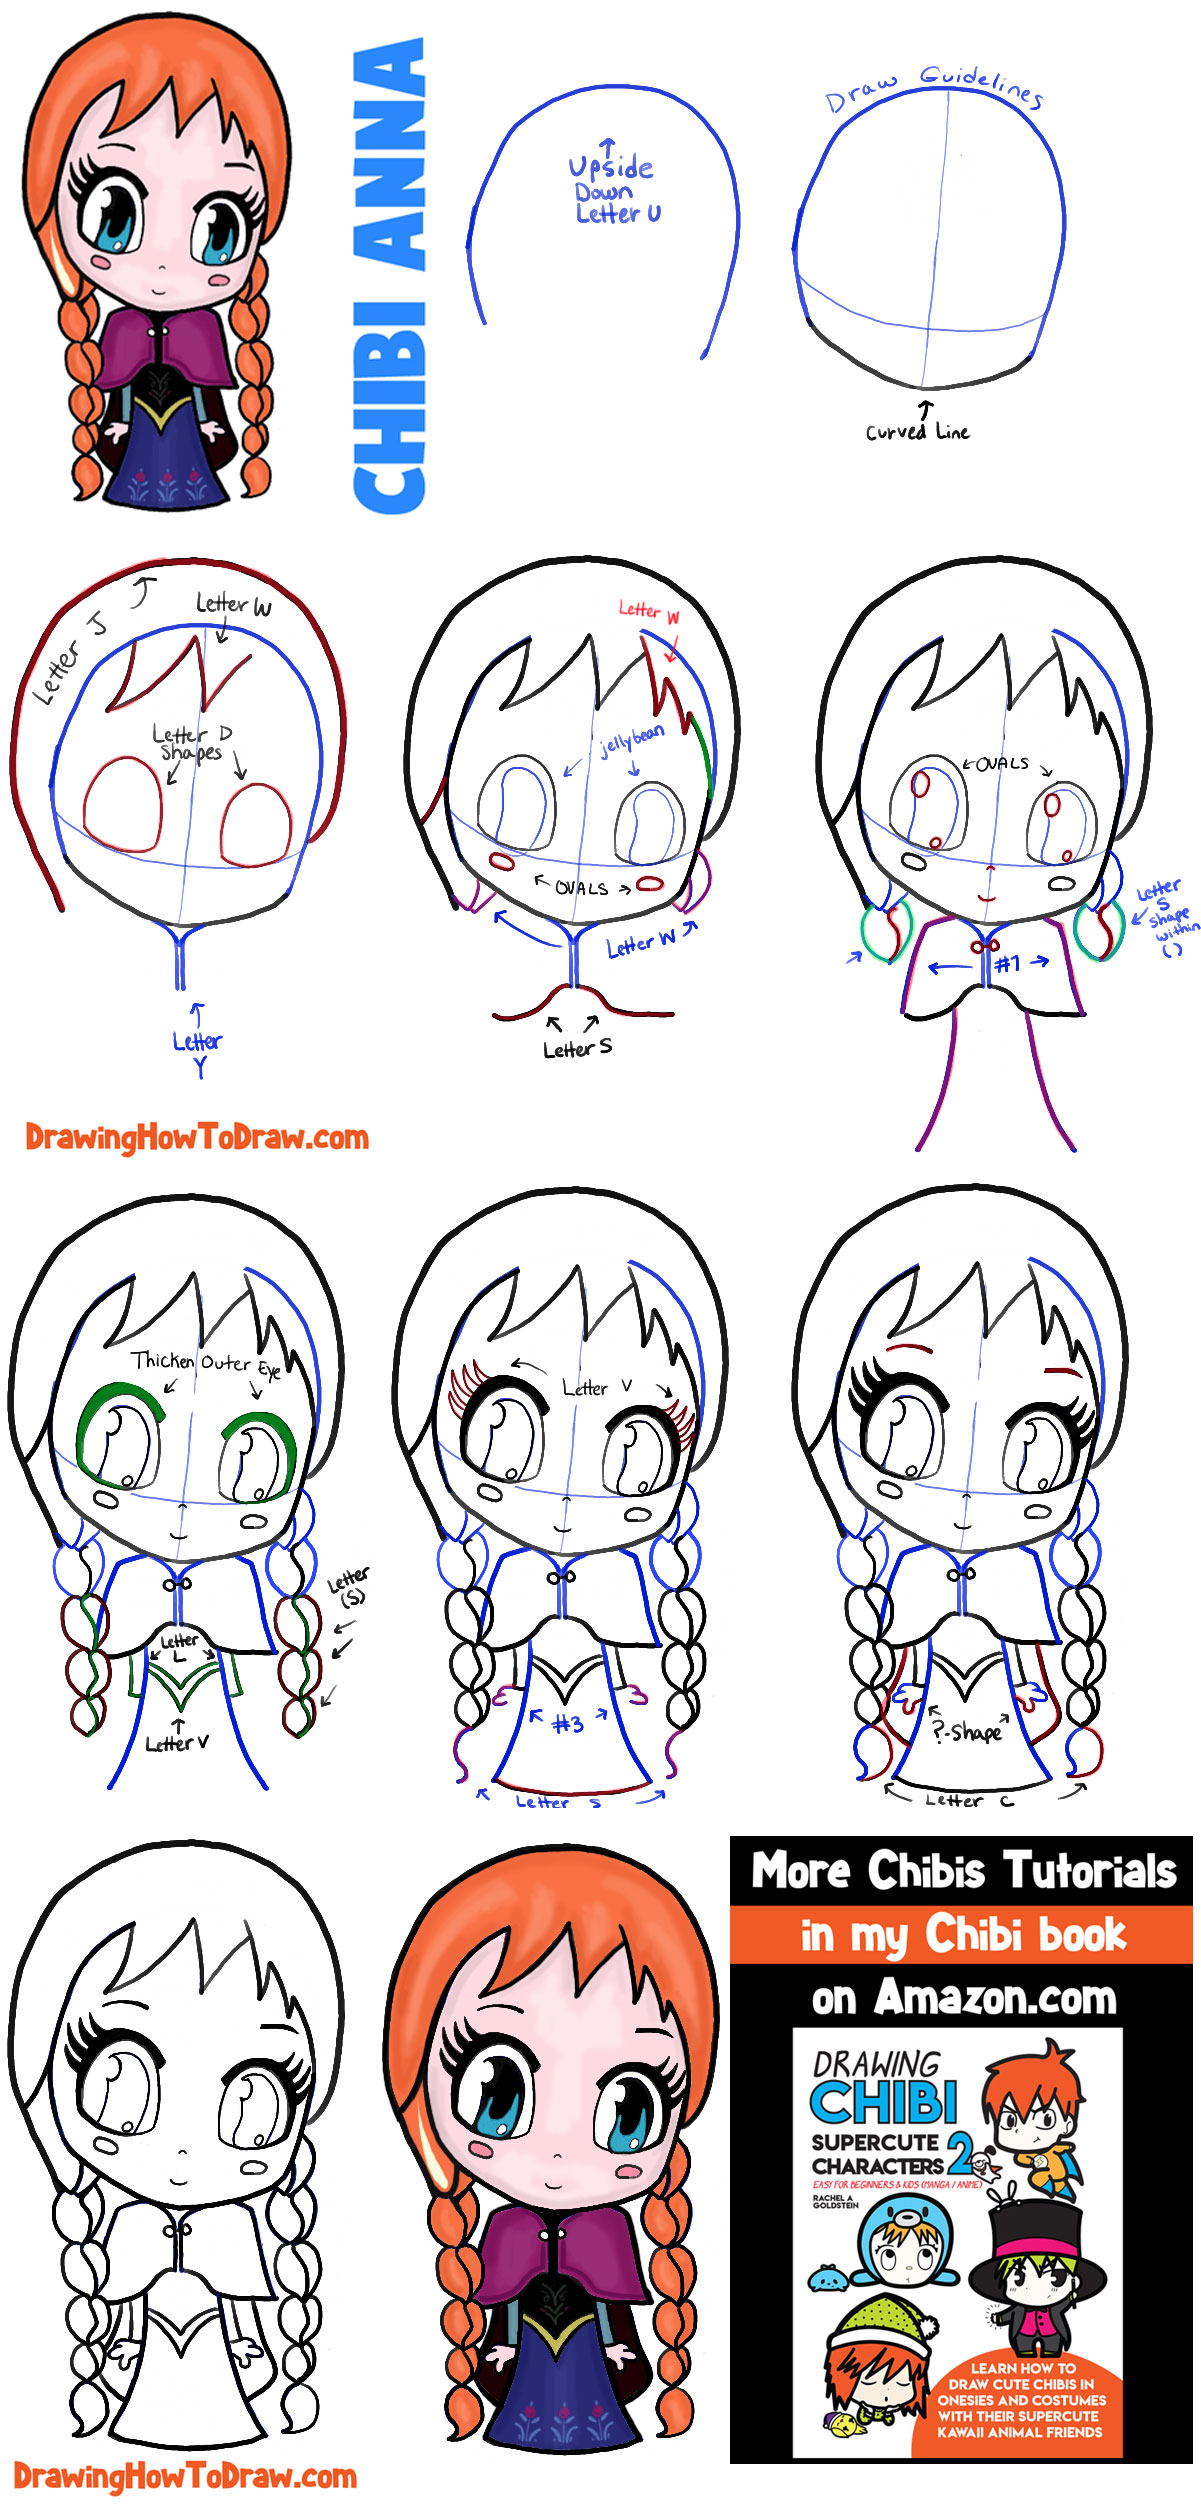 How to Draw Chibi Anna from Frozen with Easy Step by Step Tutorial